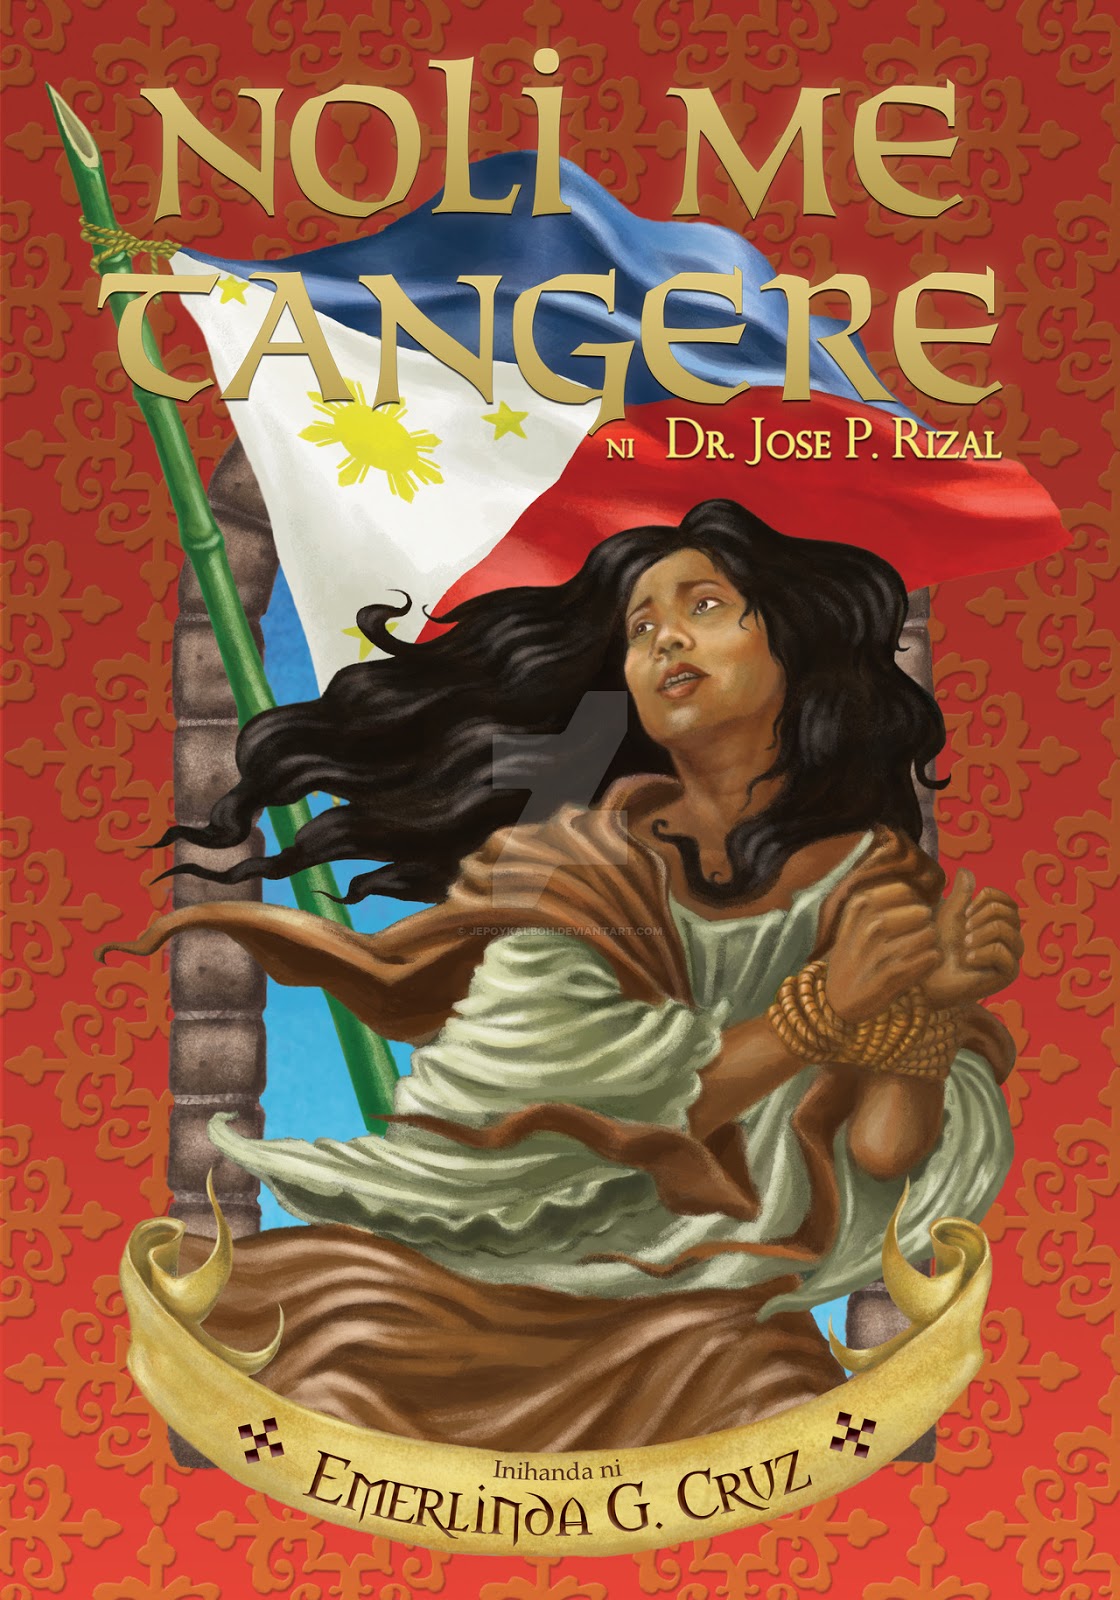 noli me tangere cover - philippin news collections